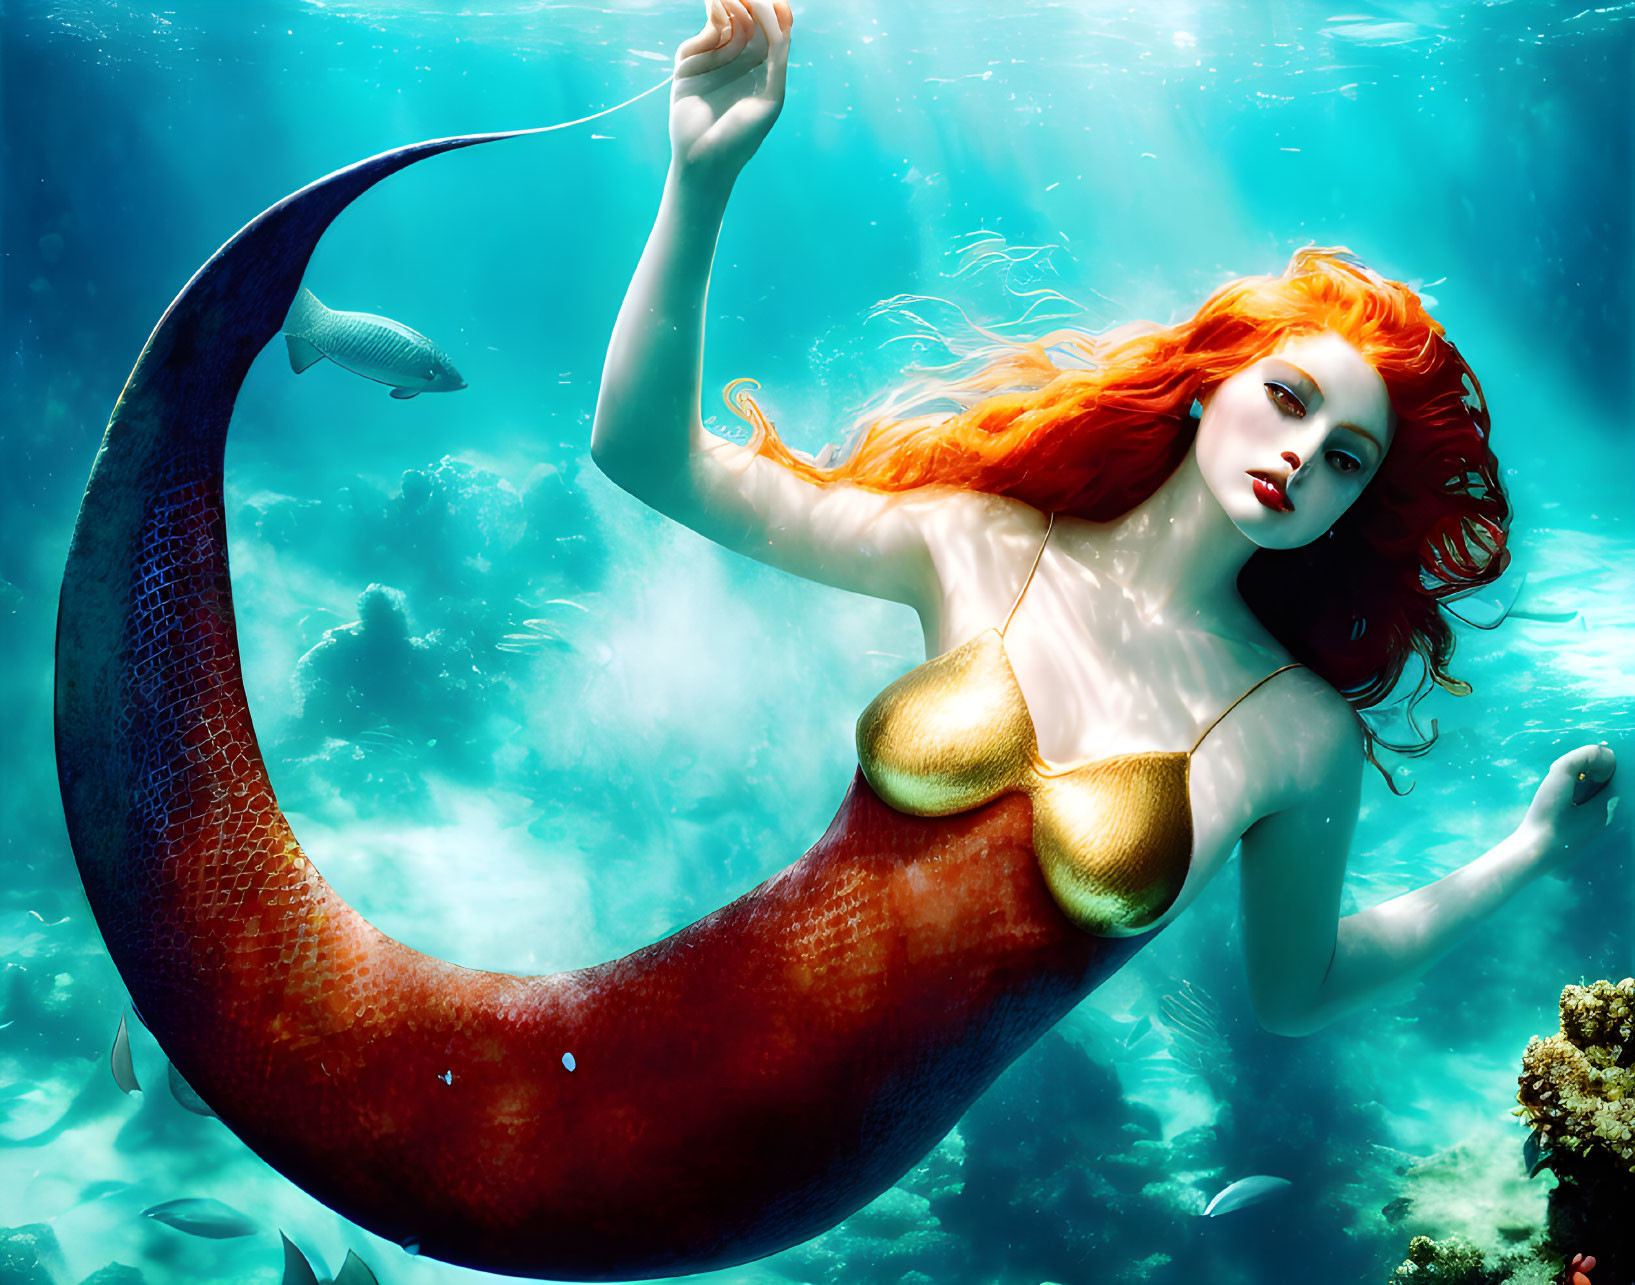 Epic poster art Fierce mermaid with curly red hair